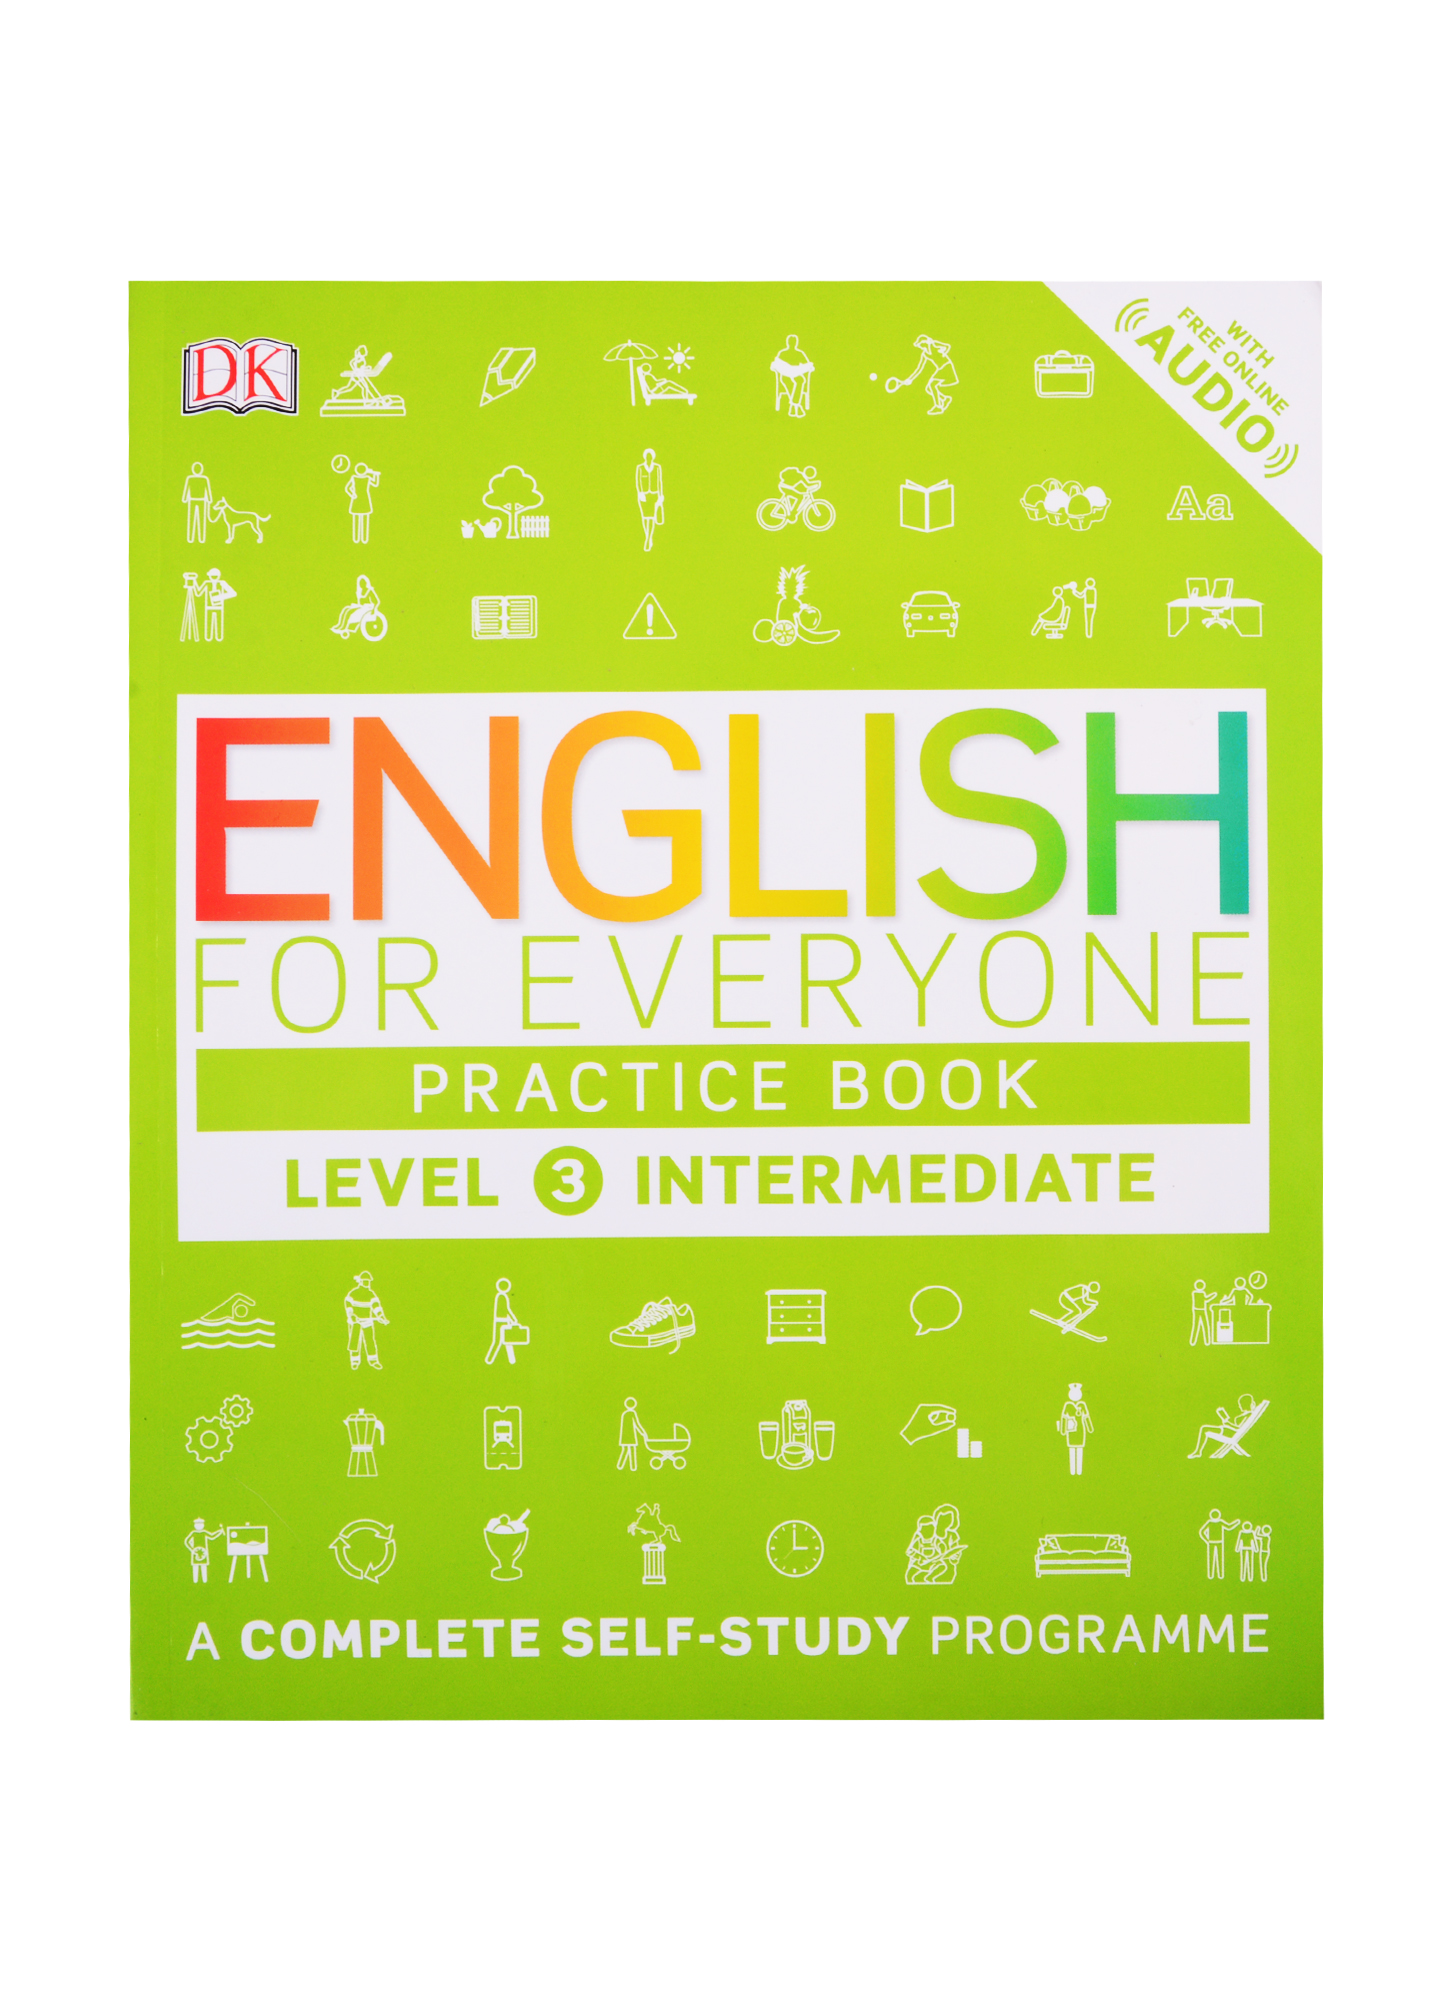 English for Everyone Practice Book Level 3 Intermediate english for everyone course book level 2 beginner a complete self study programme